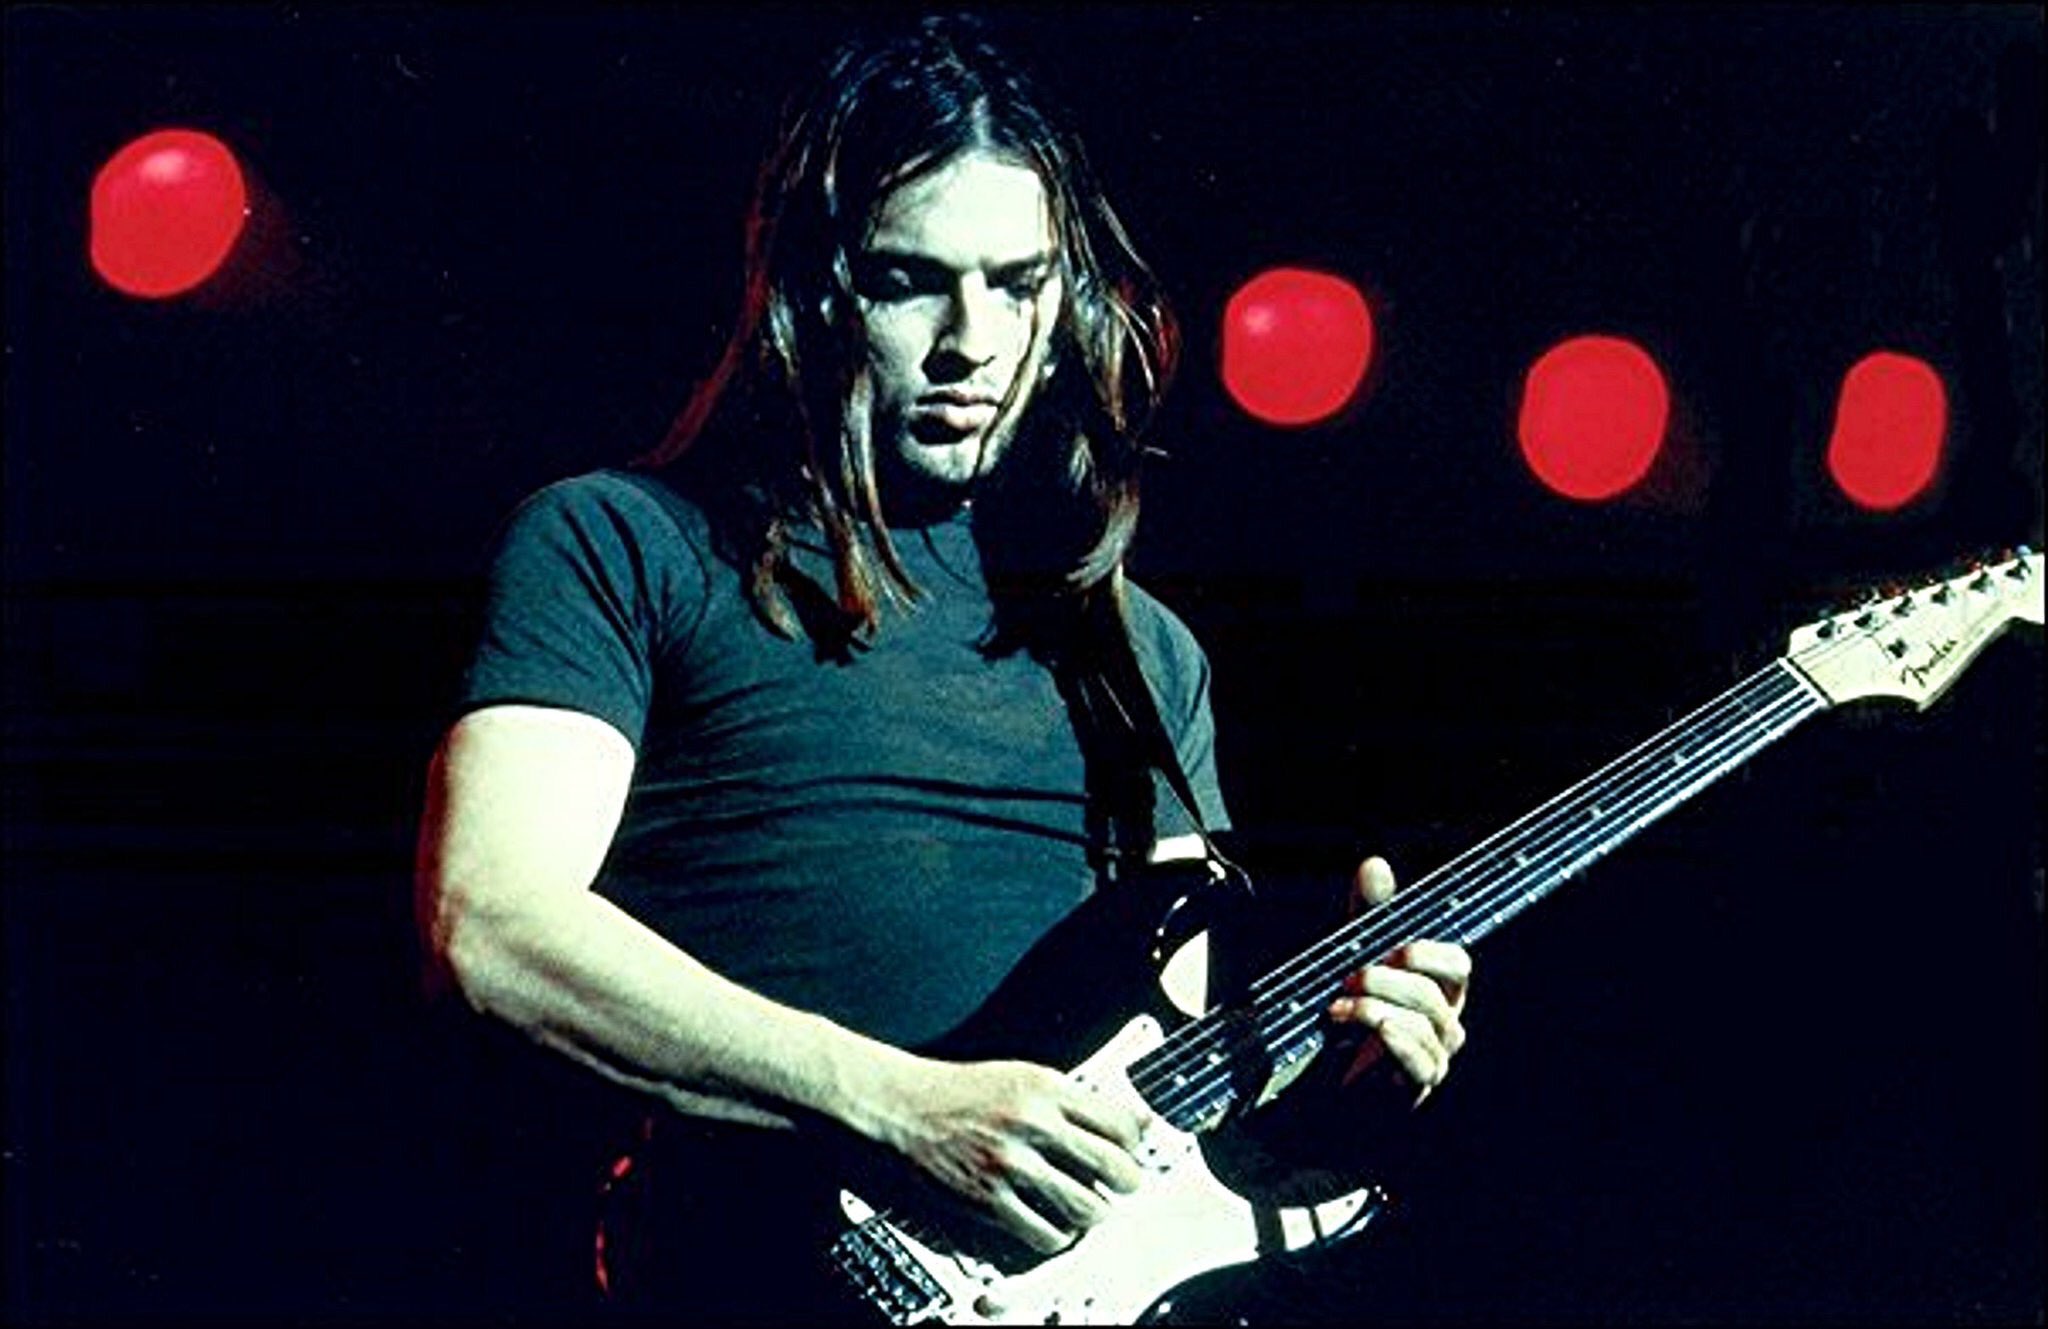 Happy birthday to David Gilmour, member of Pink Floyd and an absolute fucking legend. 